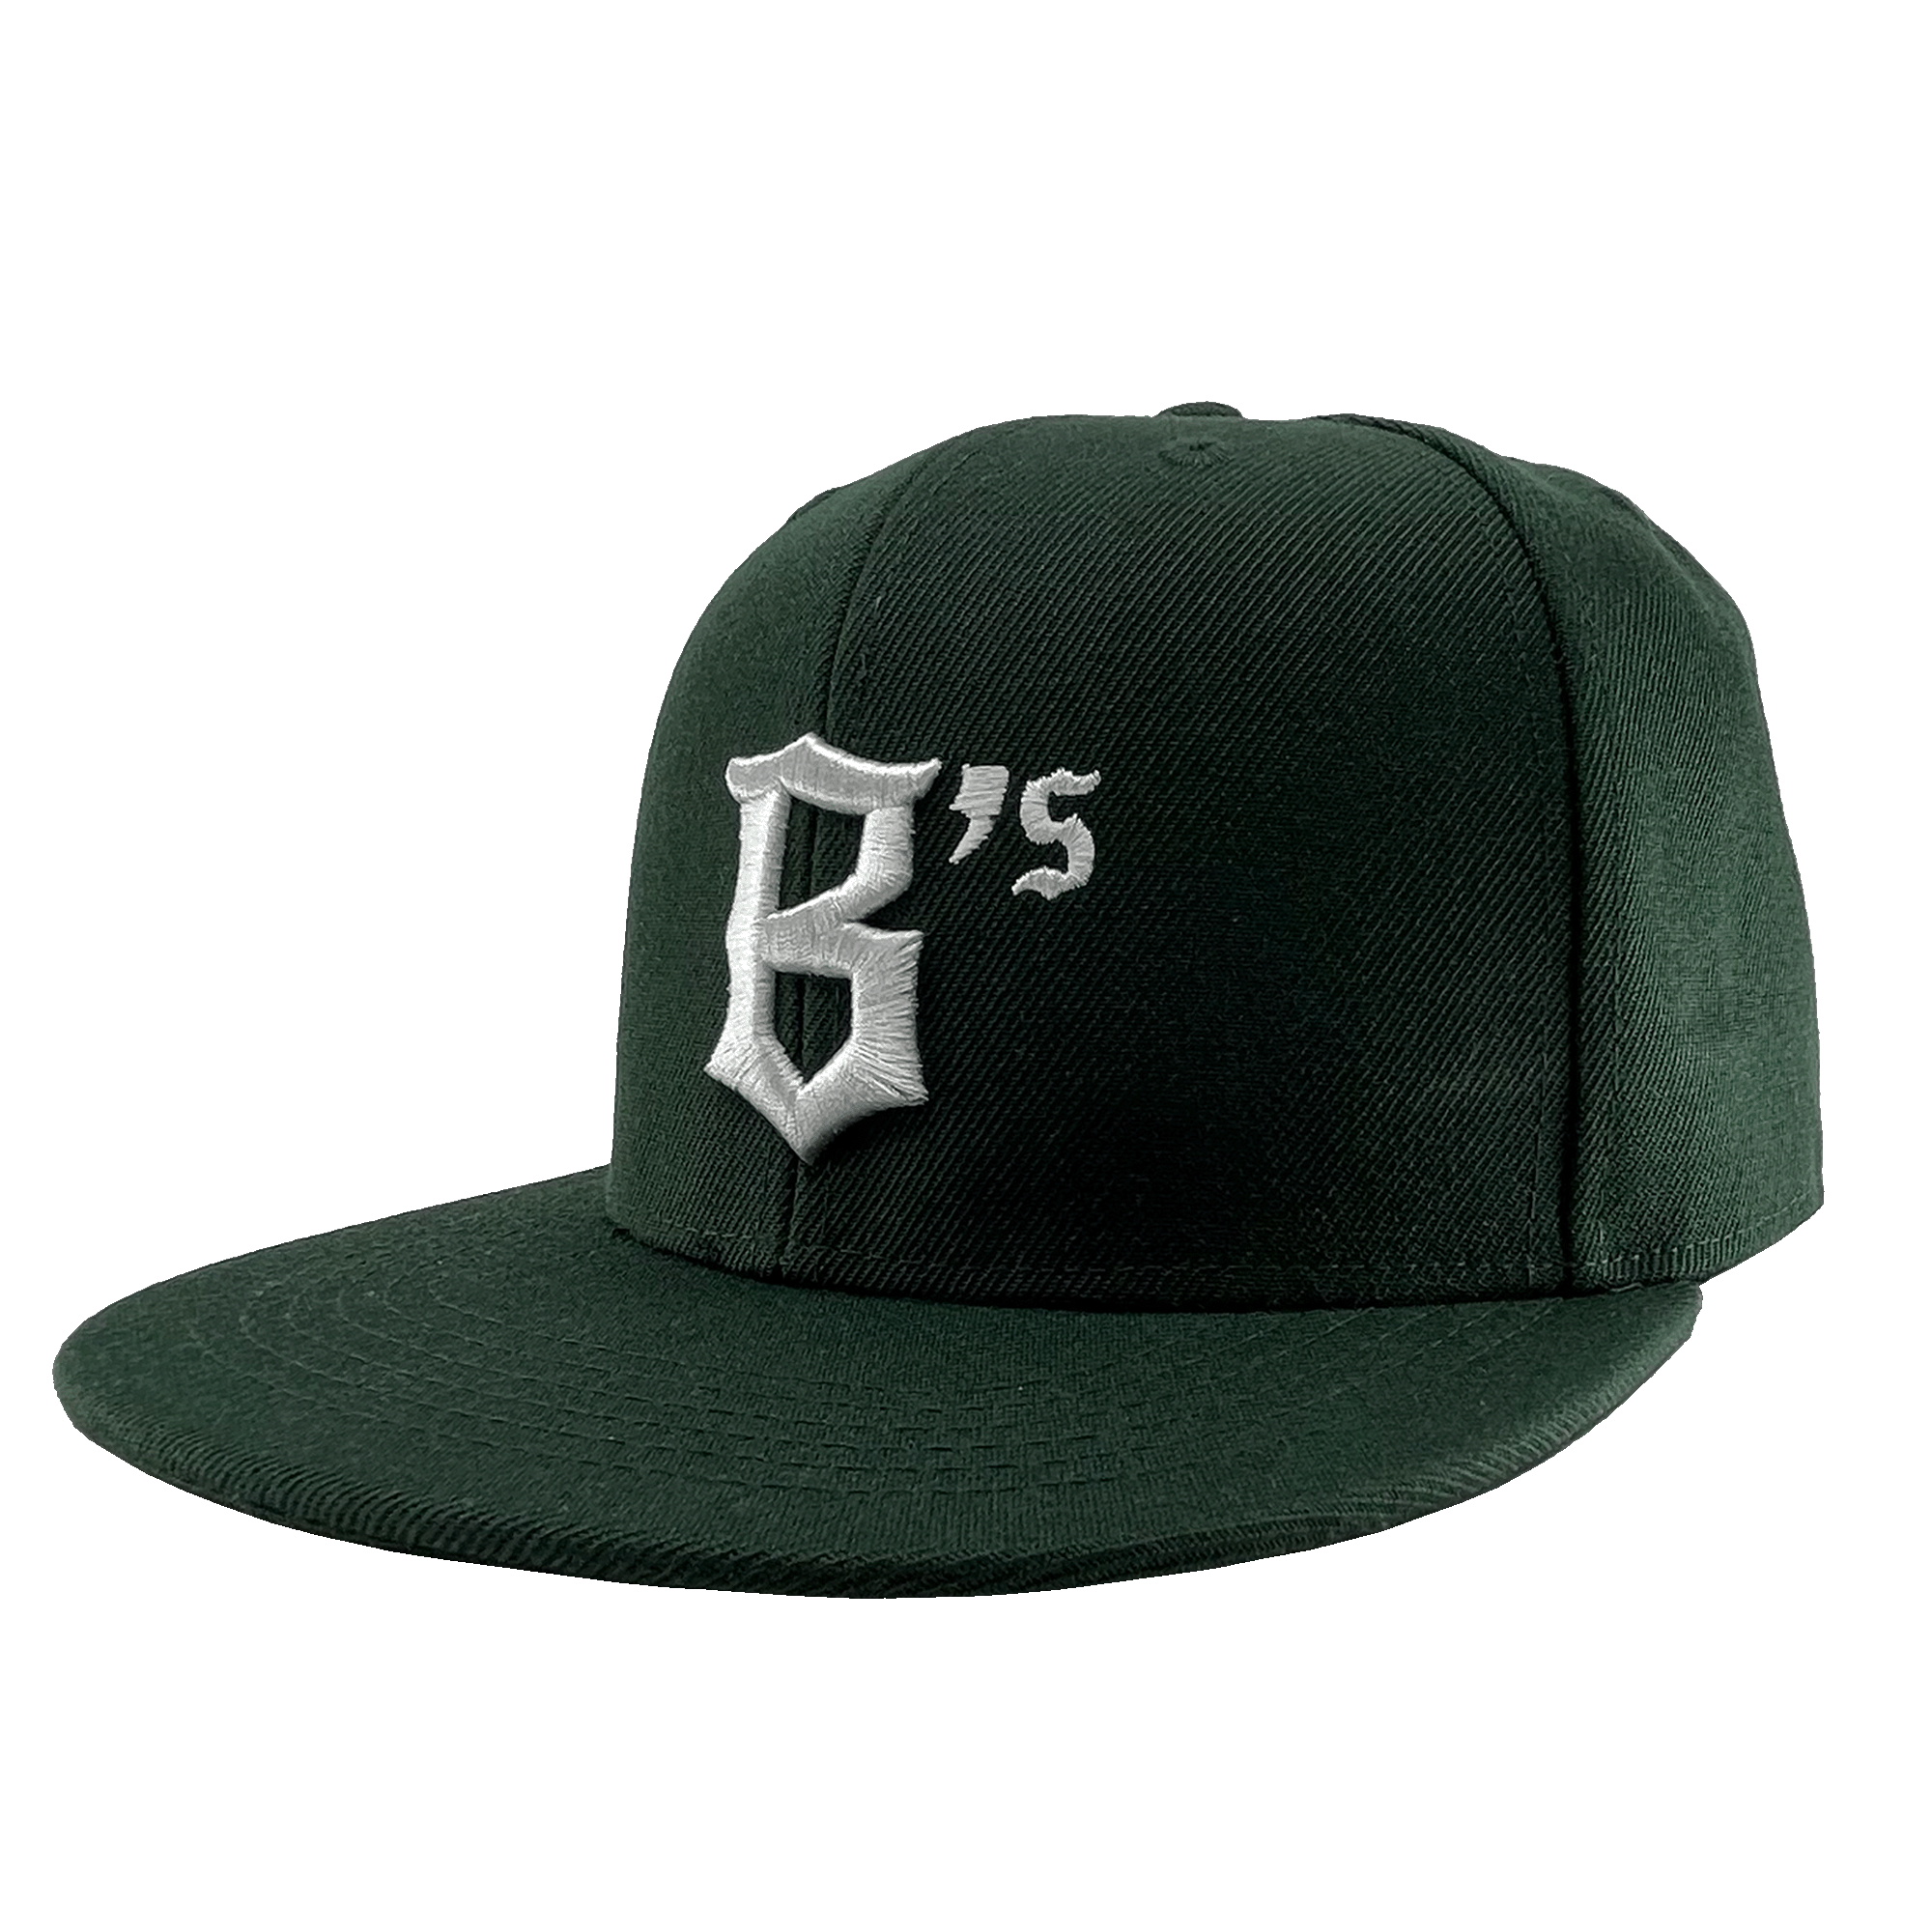 Hat - Oakland Ballers Embroidered B's Logo, Snapback